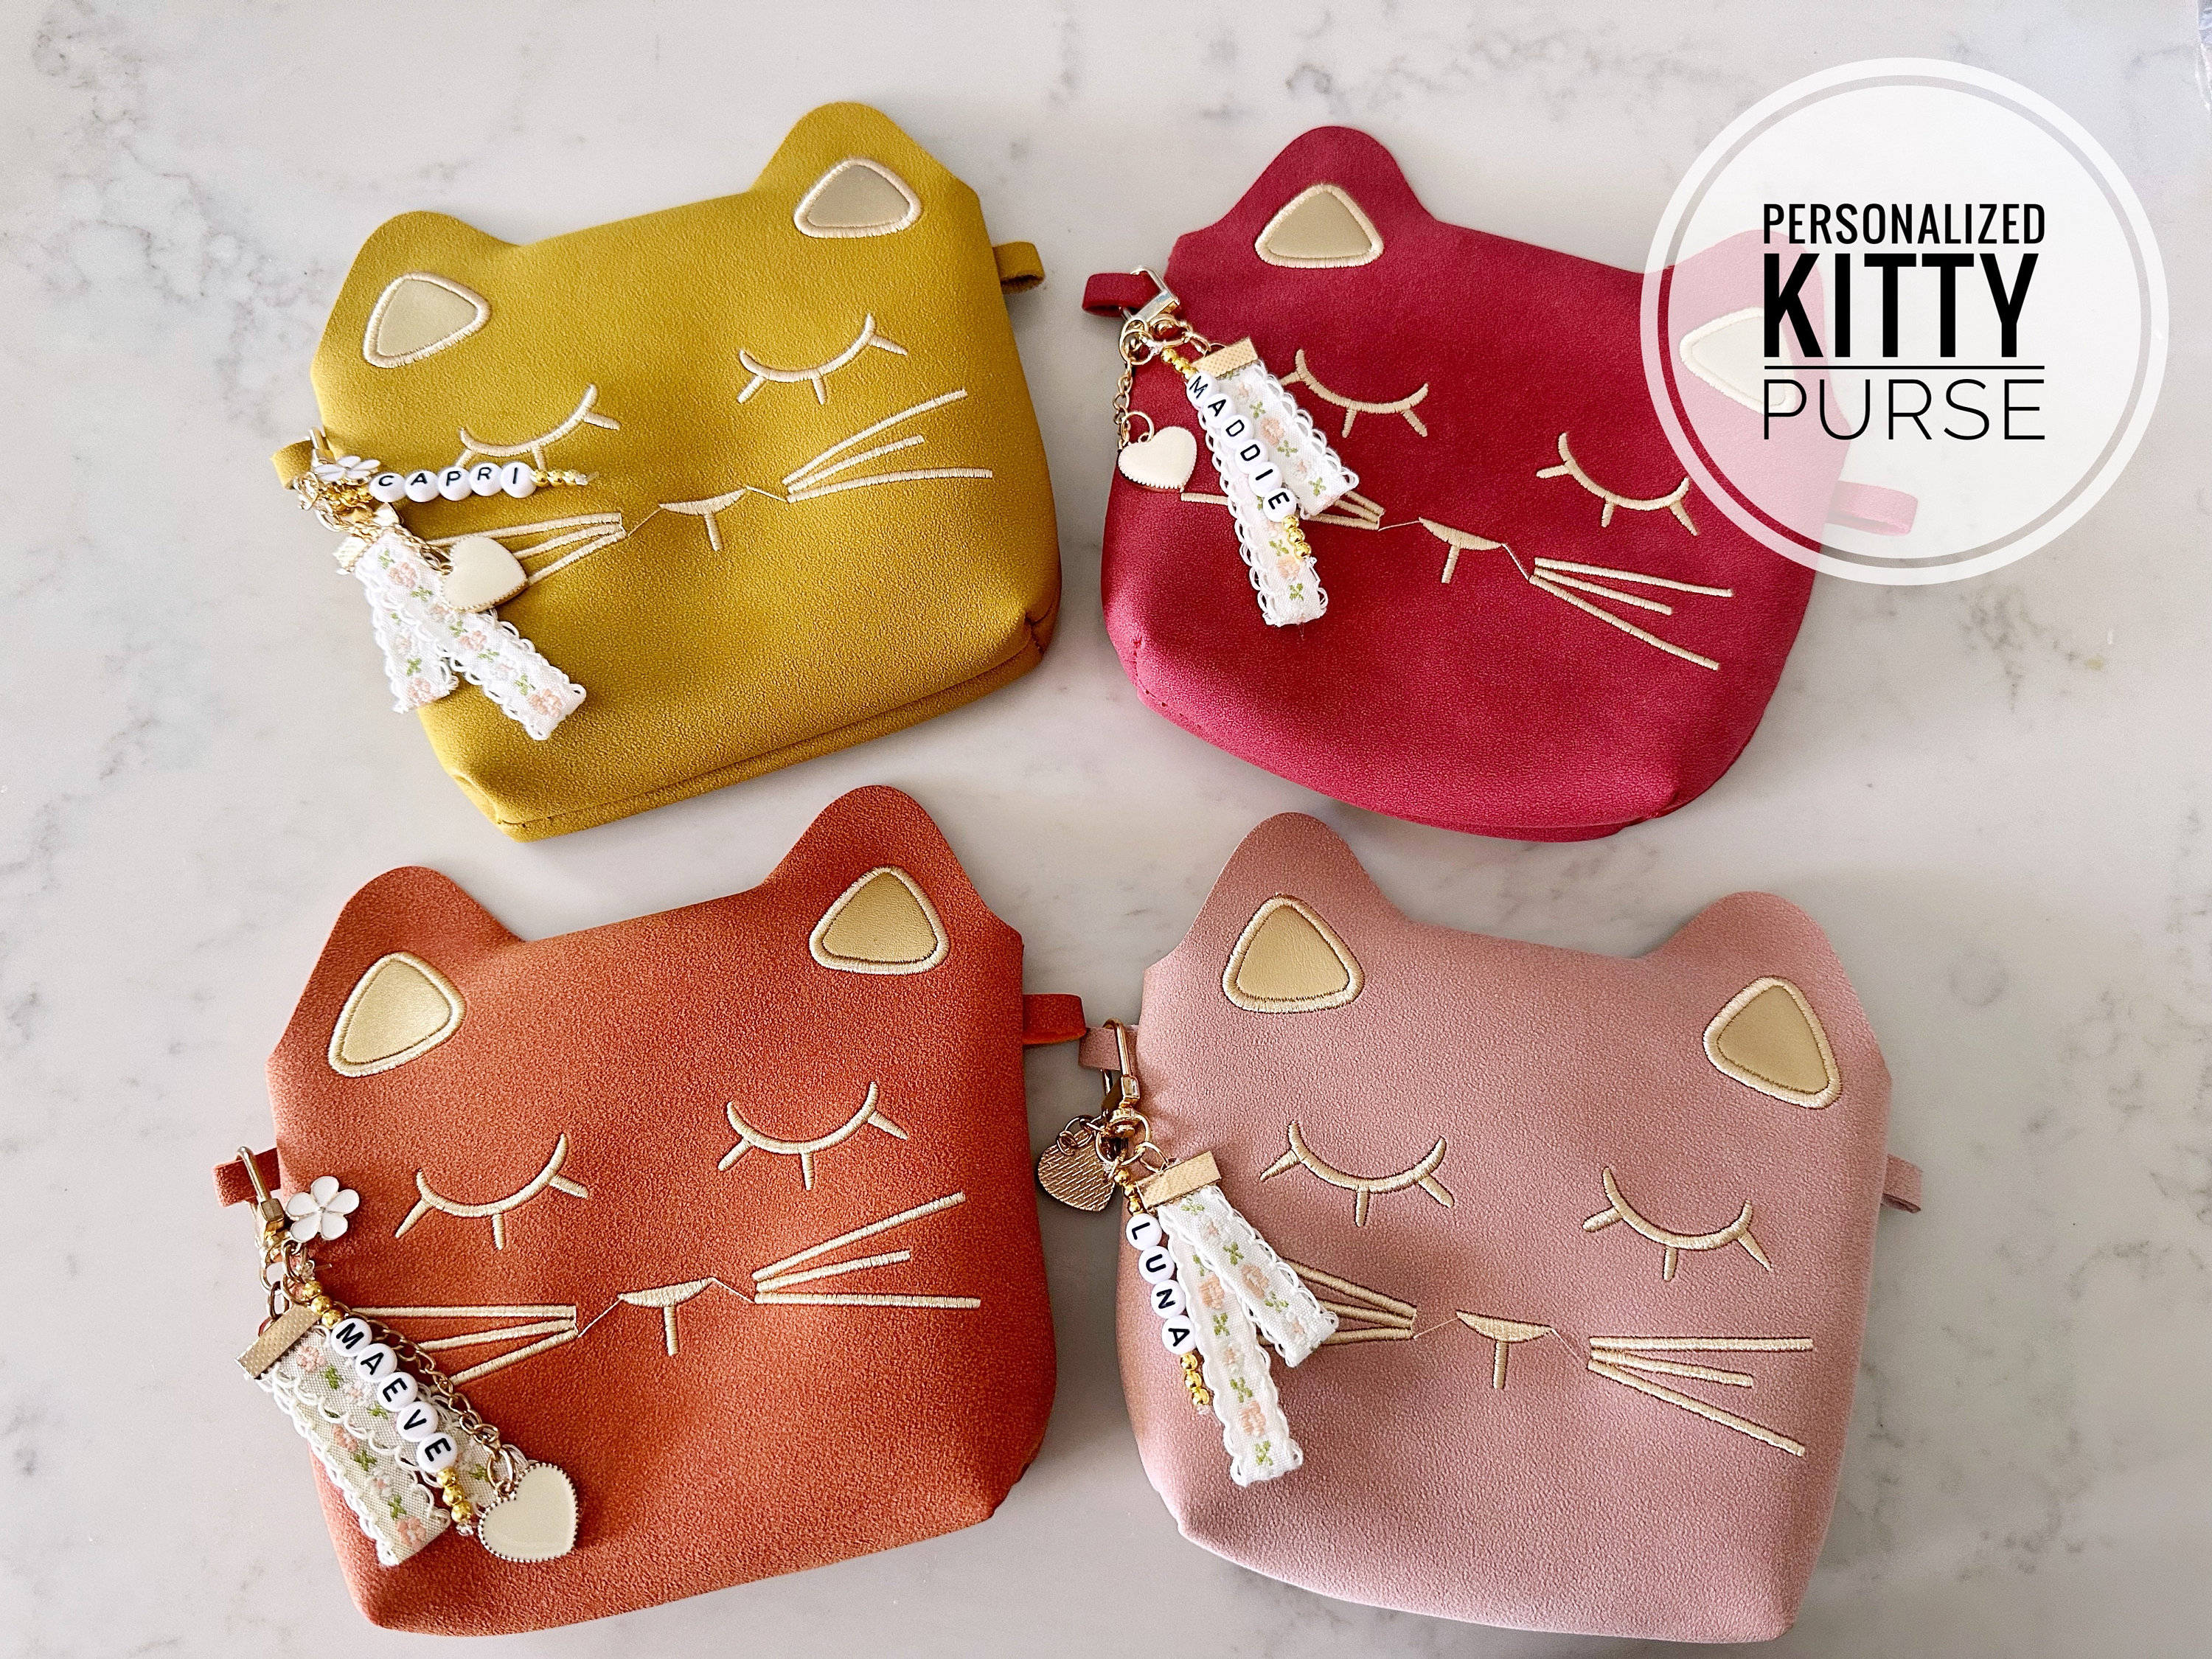 Kawaii Kitty Crossbody Bag with Ribbon Bowknot Wallet Coin Purse Pouch  Kitty Cat Purse Accessories for Women